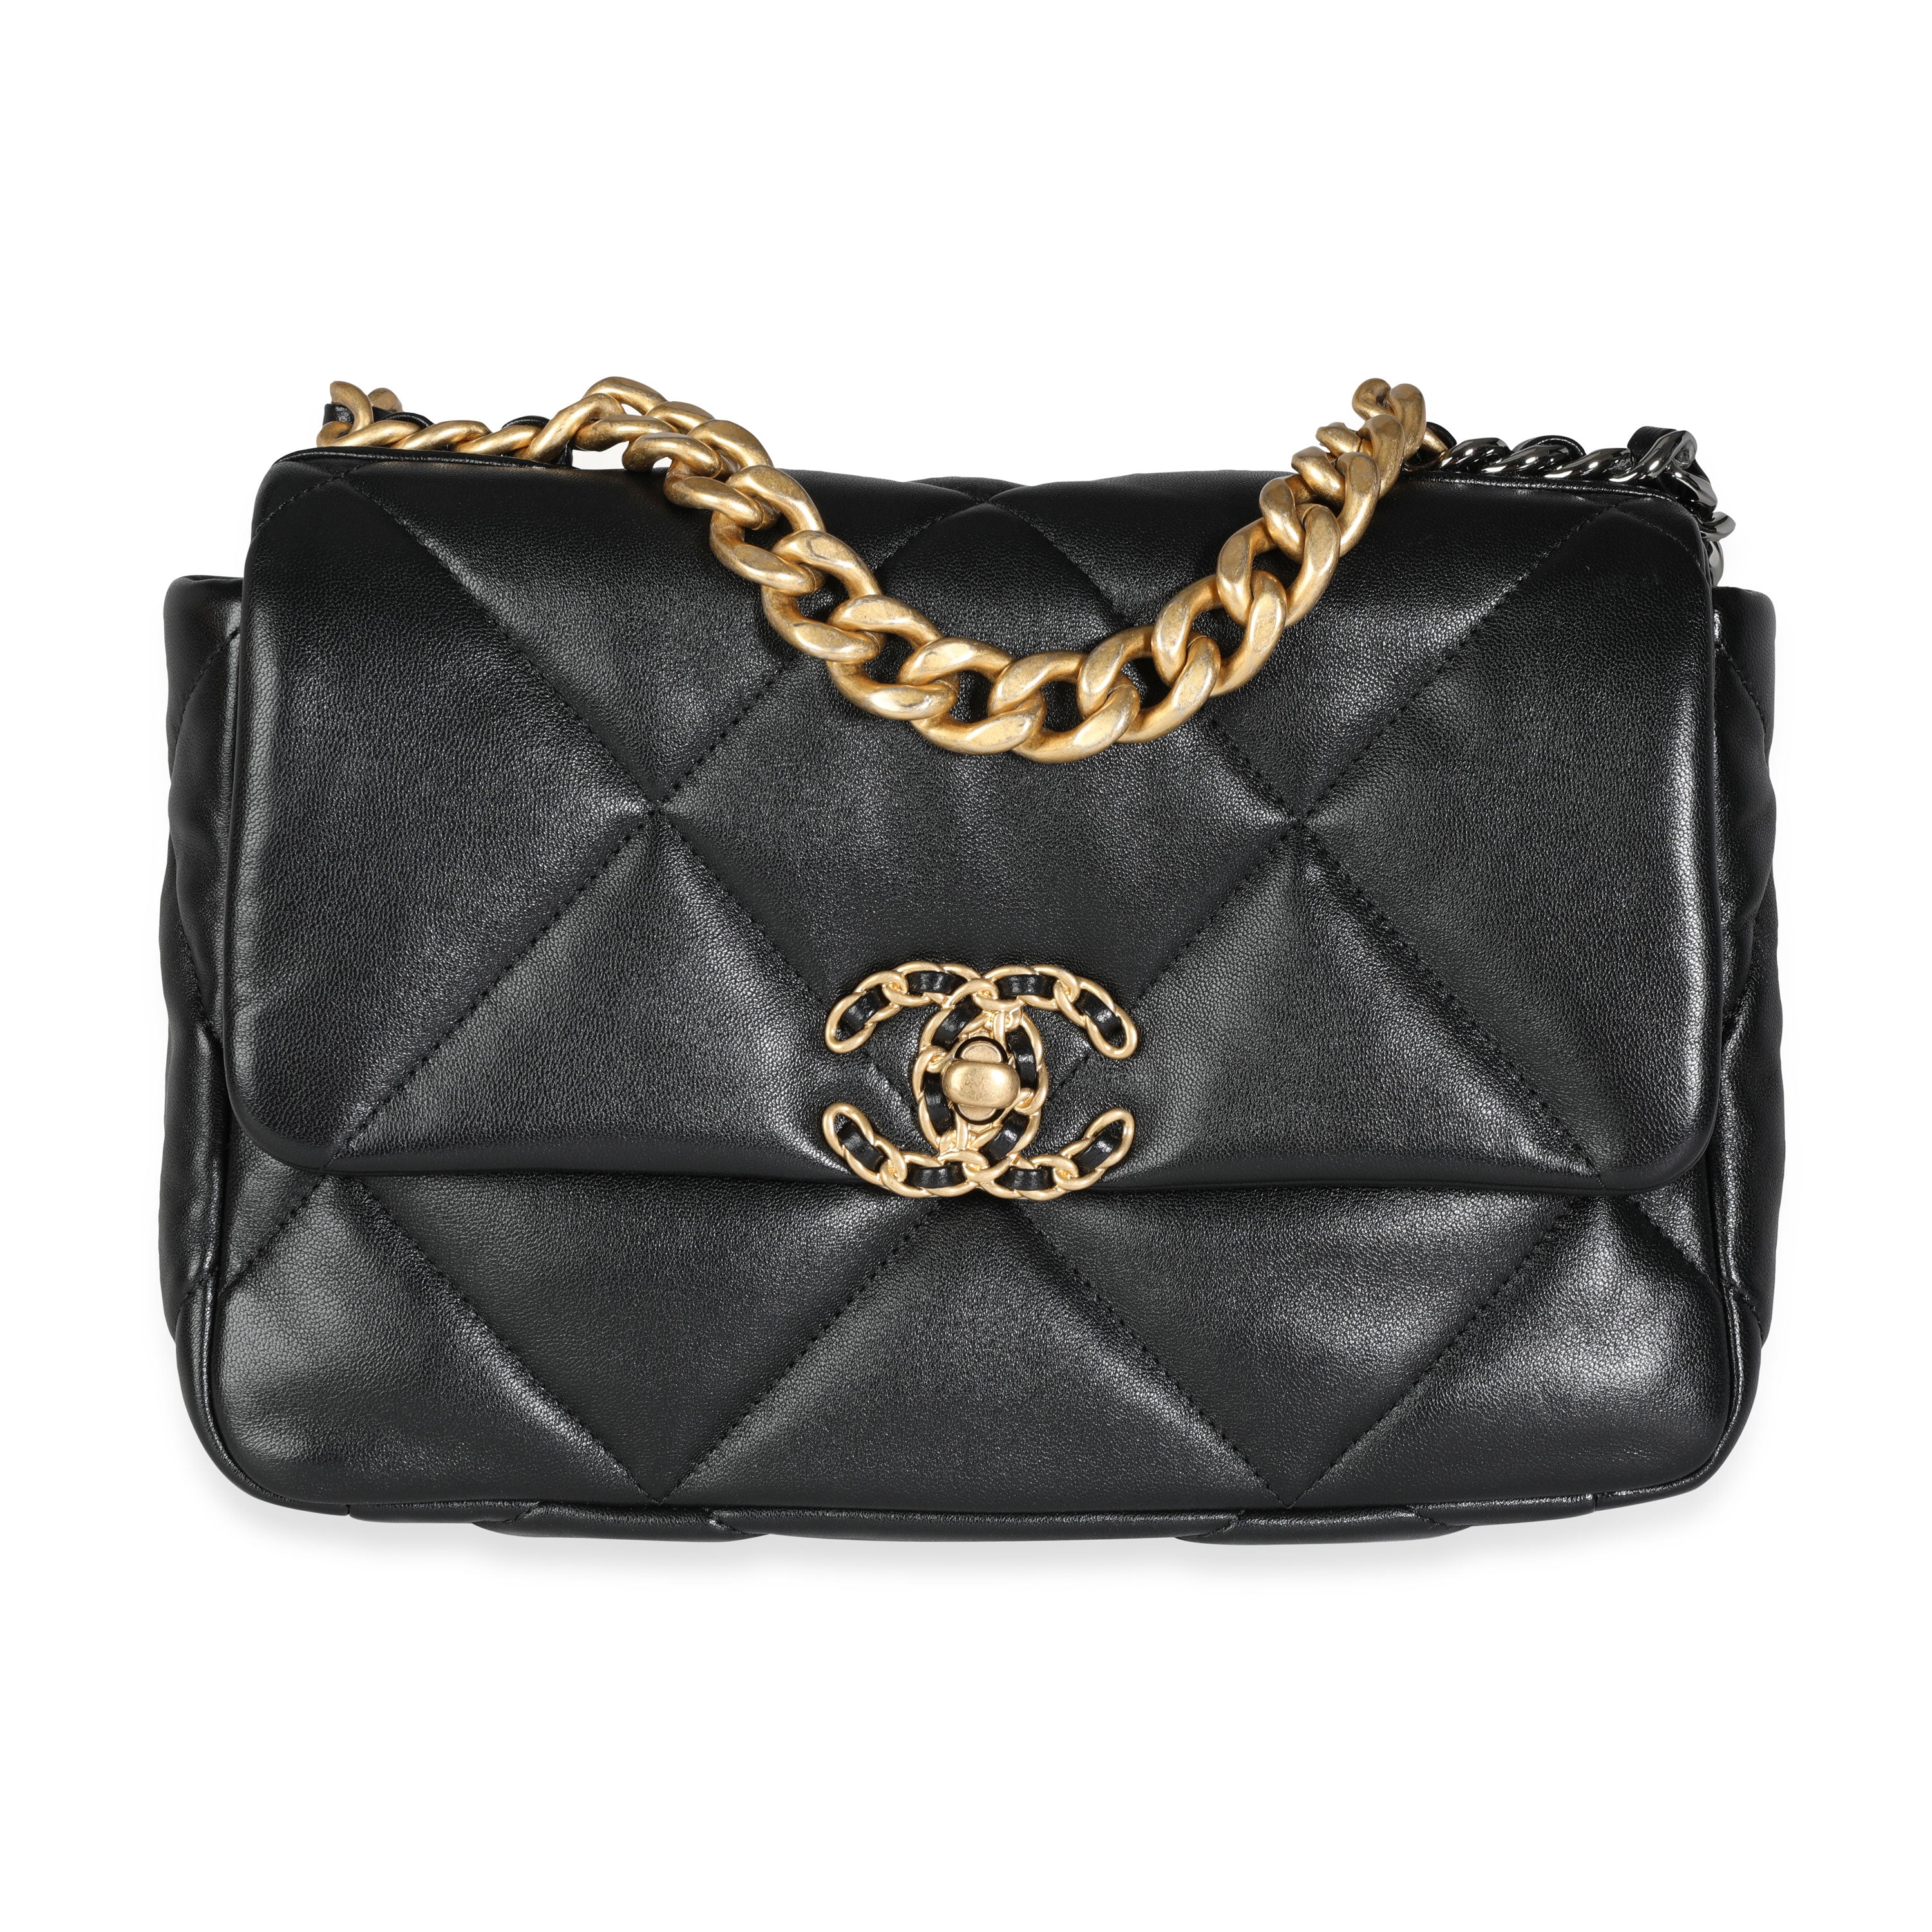 Fashionphile - The Chanel Lambskin Chevron Quilted Small Urban